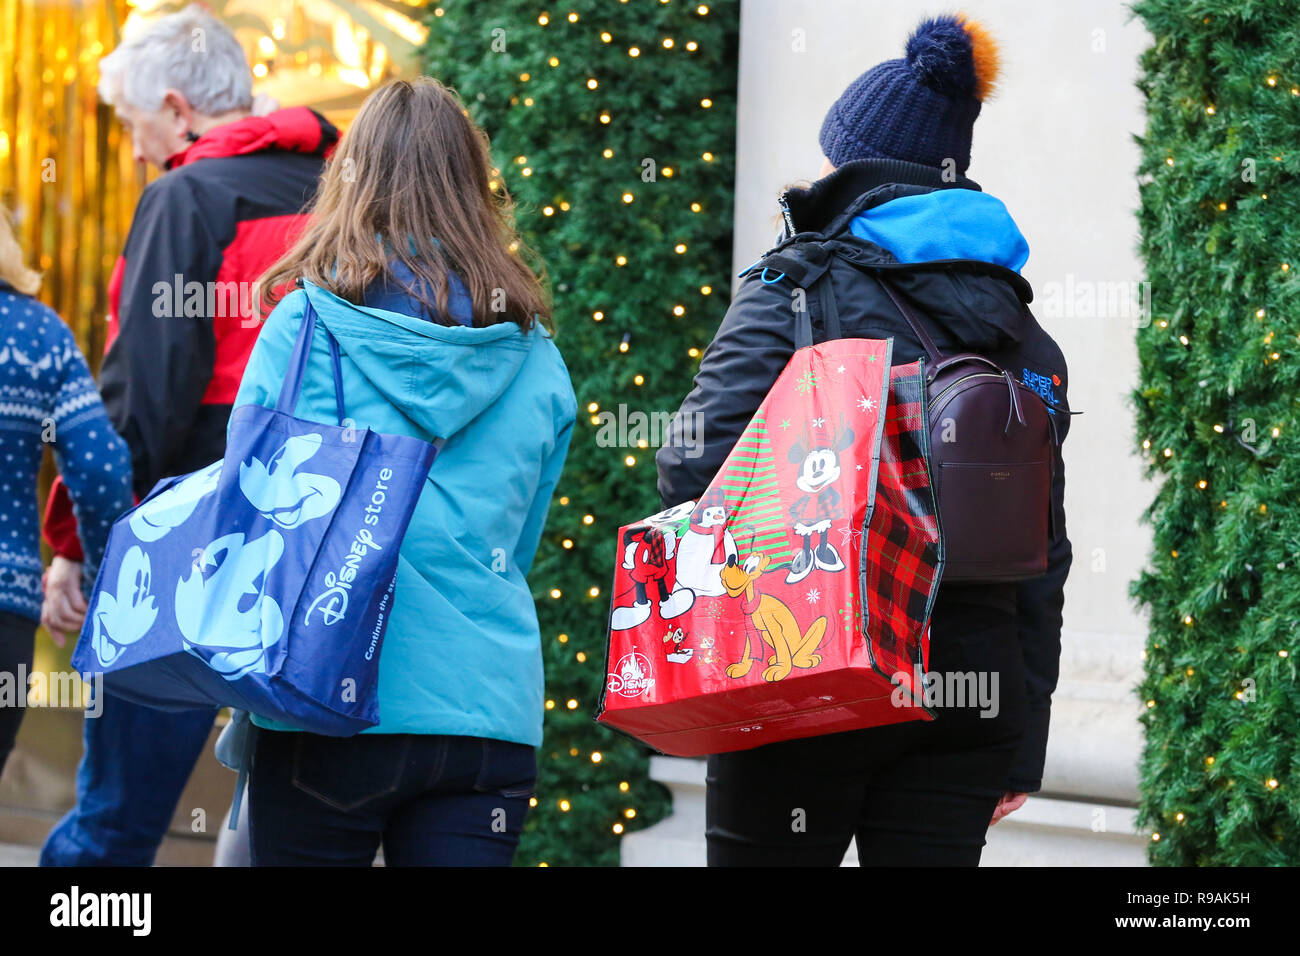 London, UK. 21st Dec, 2018. Women are seen with Disney shopping bags on London's Oxford Street with 3 days to Christmas Day.Retailers are expecting a rush of shoppers in the lead-up to Christmas with a number of stores starting their Winter Sales. Credit: Dinendra Haria/SOPA Images/ZUMA Wire/Alamy Live News Stock Photo